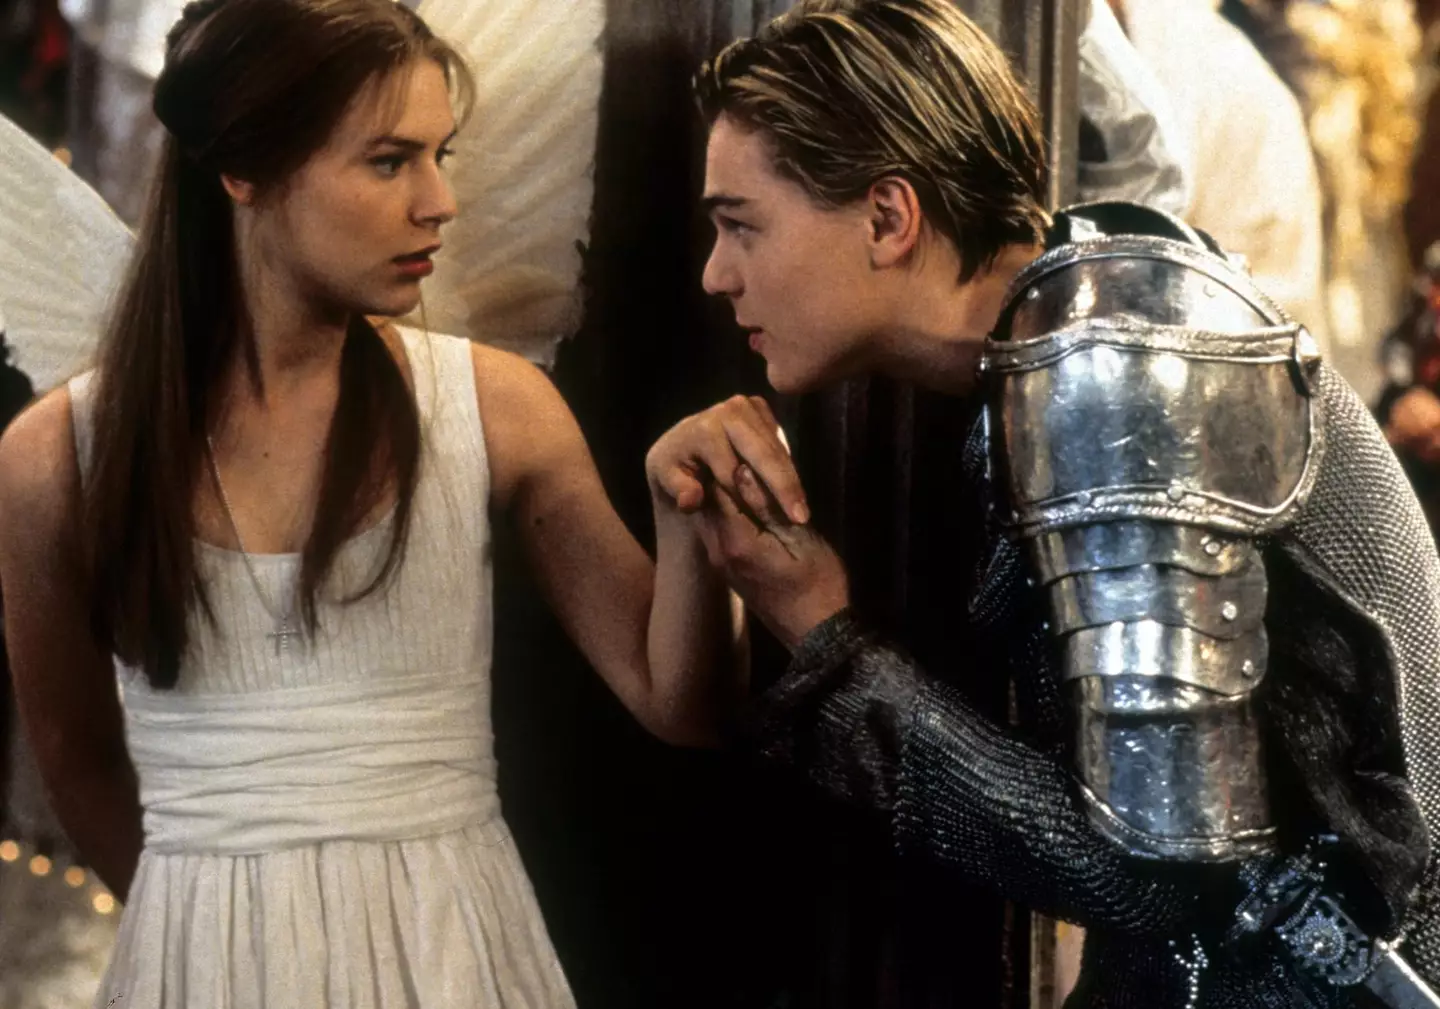 Born in 1981, Portman was only a teenager - 13, in fact - when Romeo + Juliet began production.